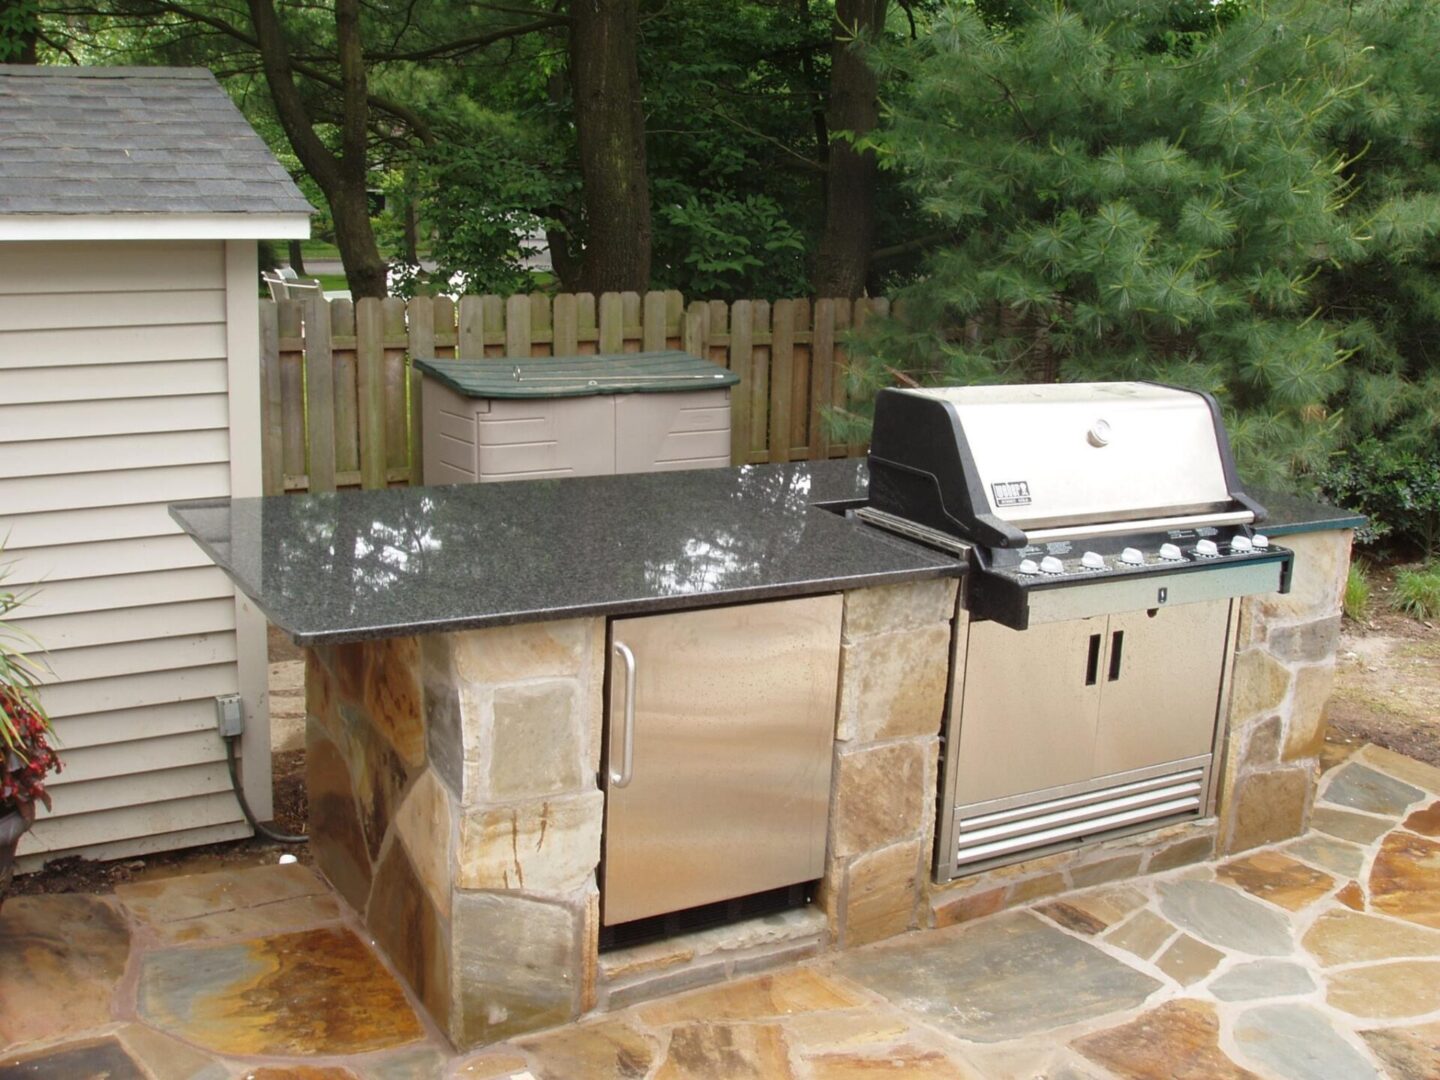 A grill and sink in the middle of an outdoor patio.